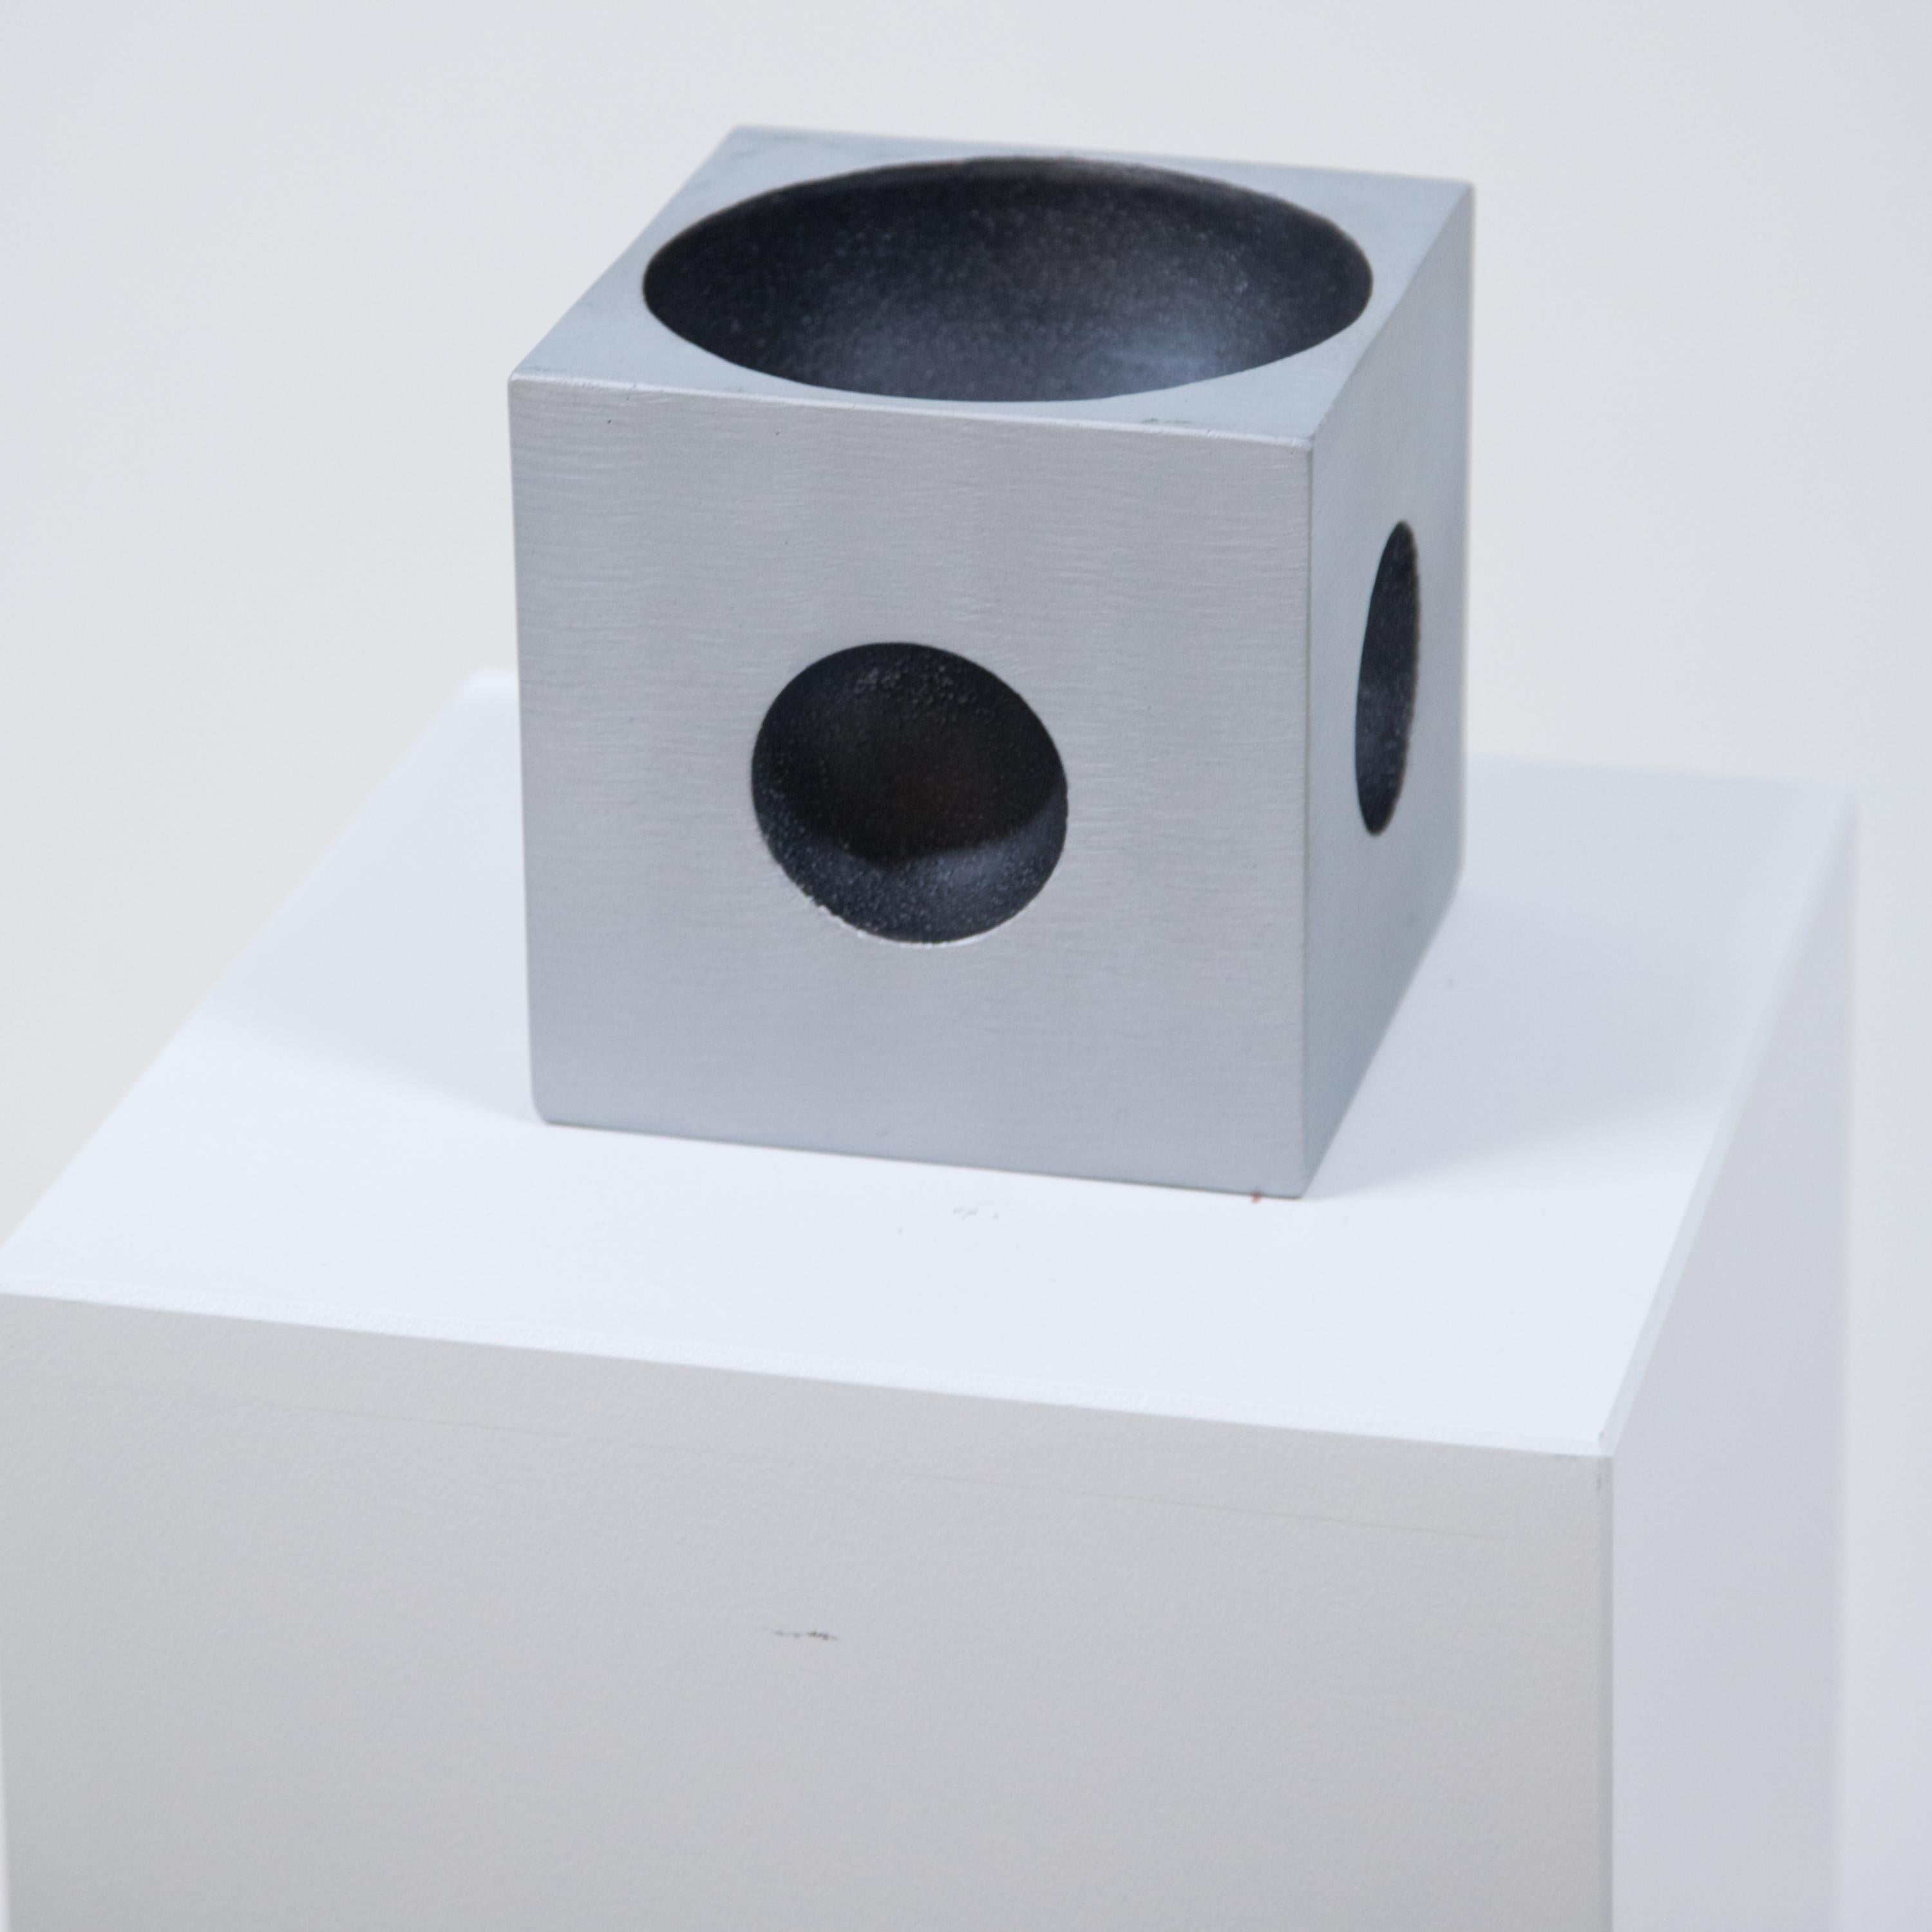 A Modernist cube sculpture.
By artist Lorenzo Burchiellaro.
Textured cast aluminum
with concave top and side details.
Signed underneath Burchiellaro.
 